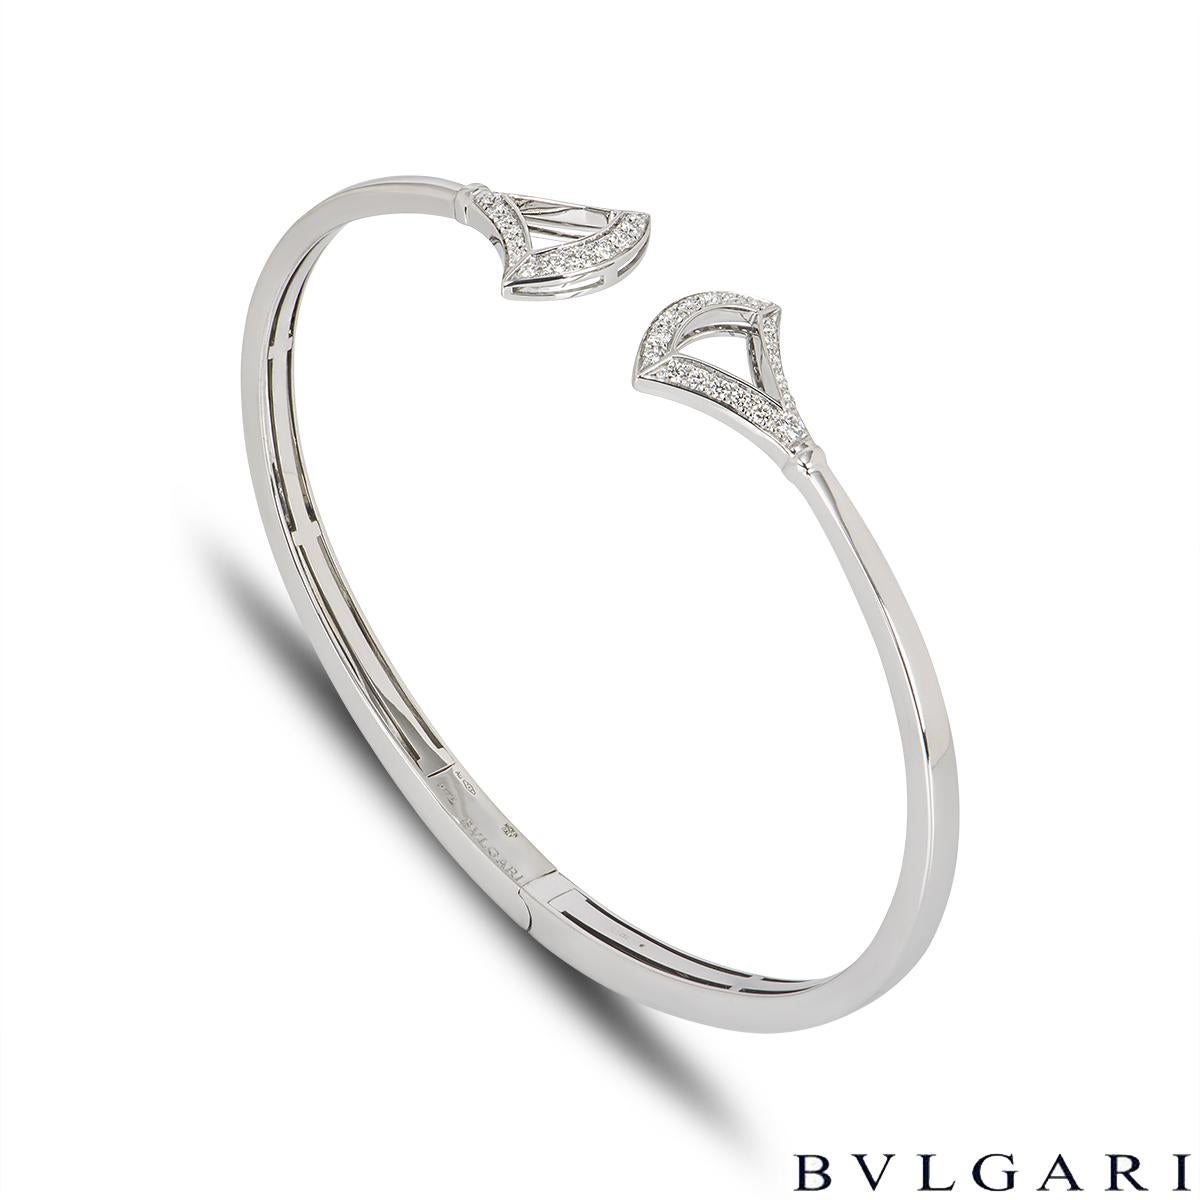 An elegant 18k white gold Bvlgari diamond bracelet from the Divas' Dream collection. The cuff style bracelet has a fan-shaped motif with 18 round brilliant cut diamonds on either end, totalling approximately 0.42ct. The bracelet has a gross weight